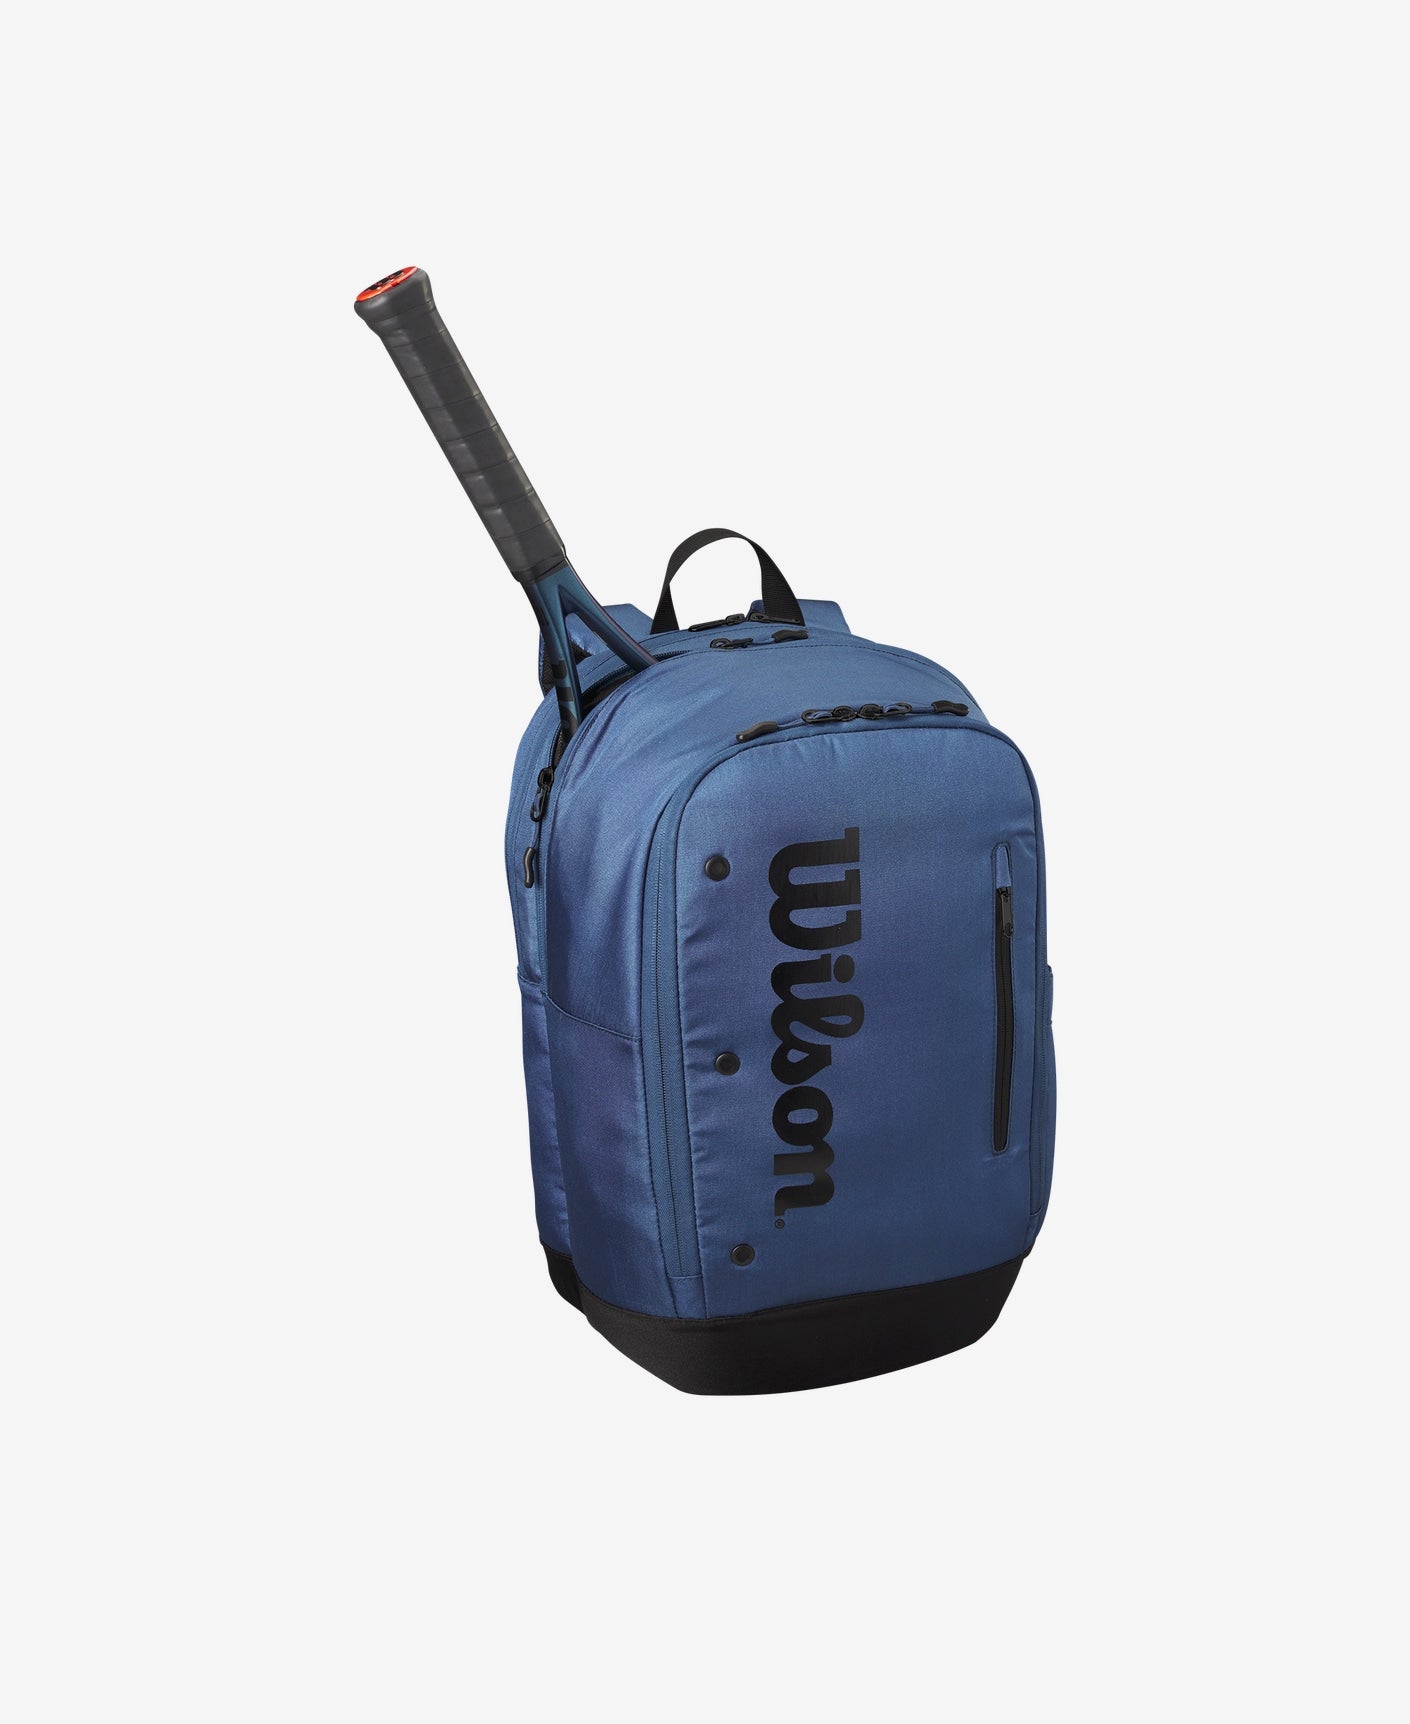 Wilson Ultra V4 Tour Backpack with dual racket storage